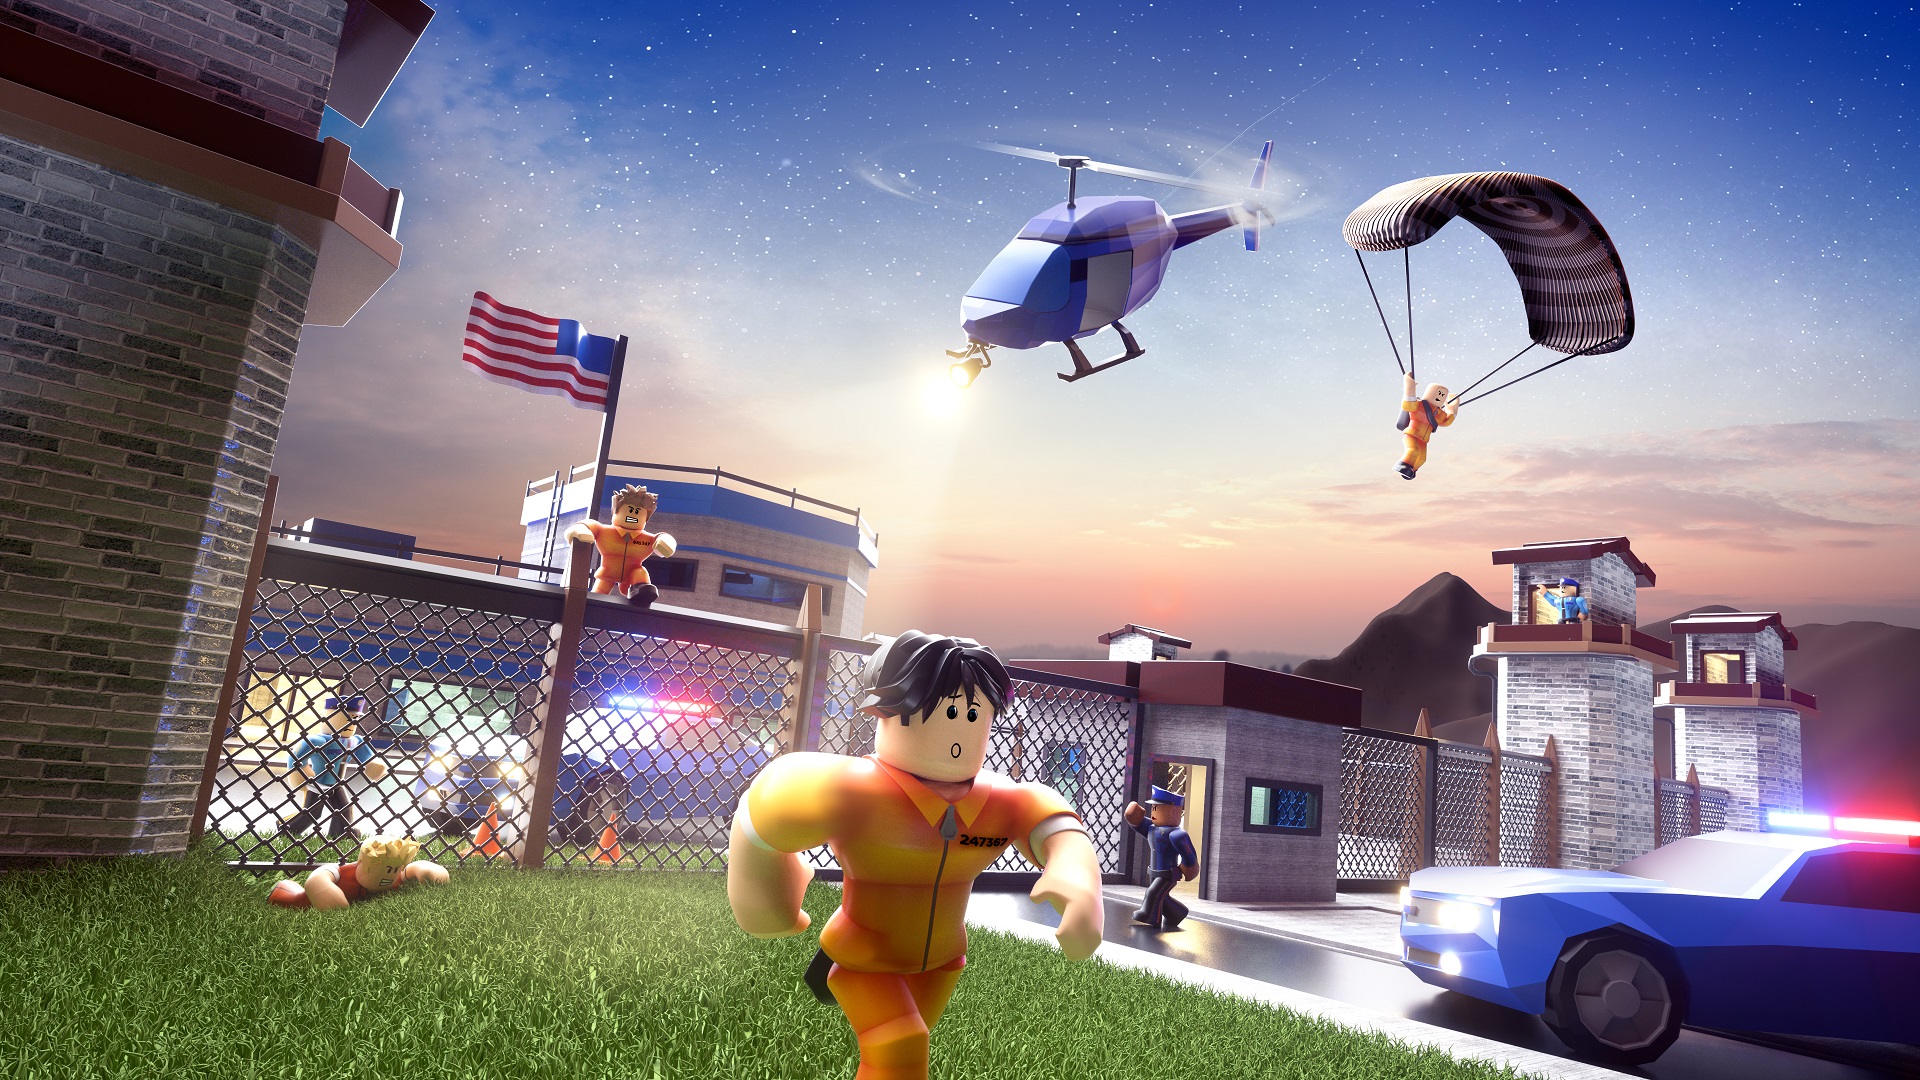 An image of Roblox characters escaping from a prison, with helicopters and police cars chasing them.